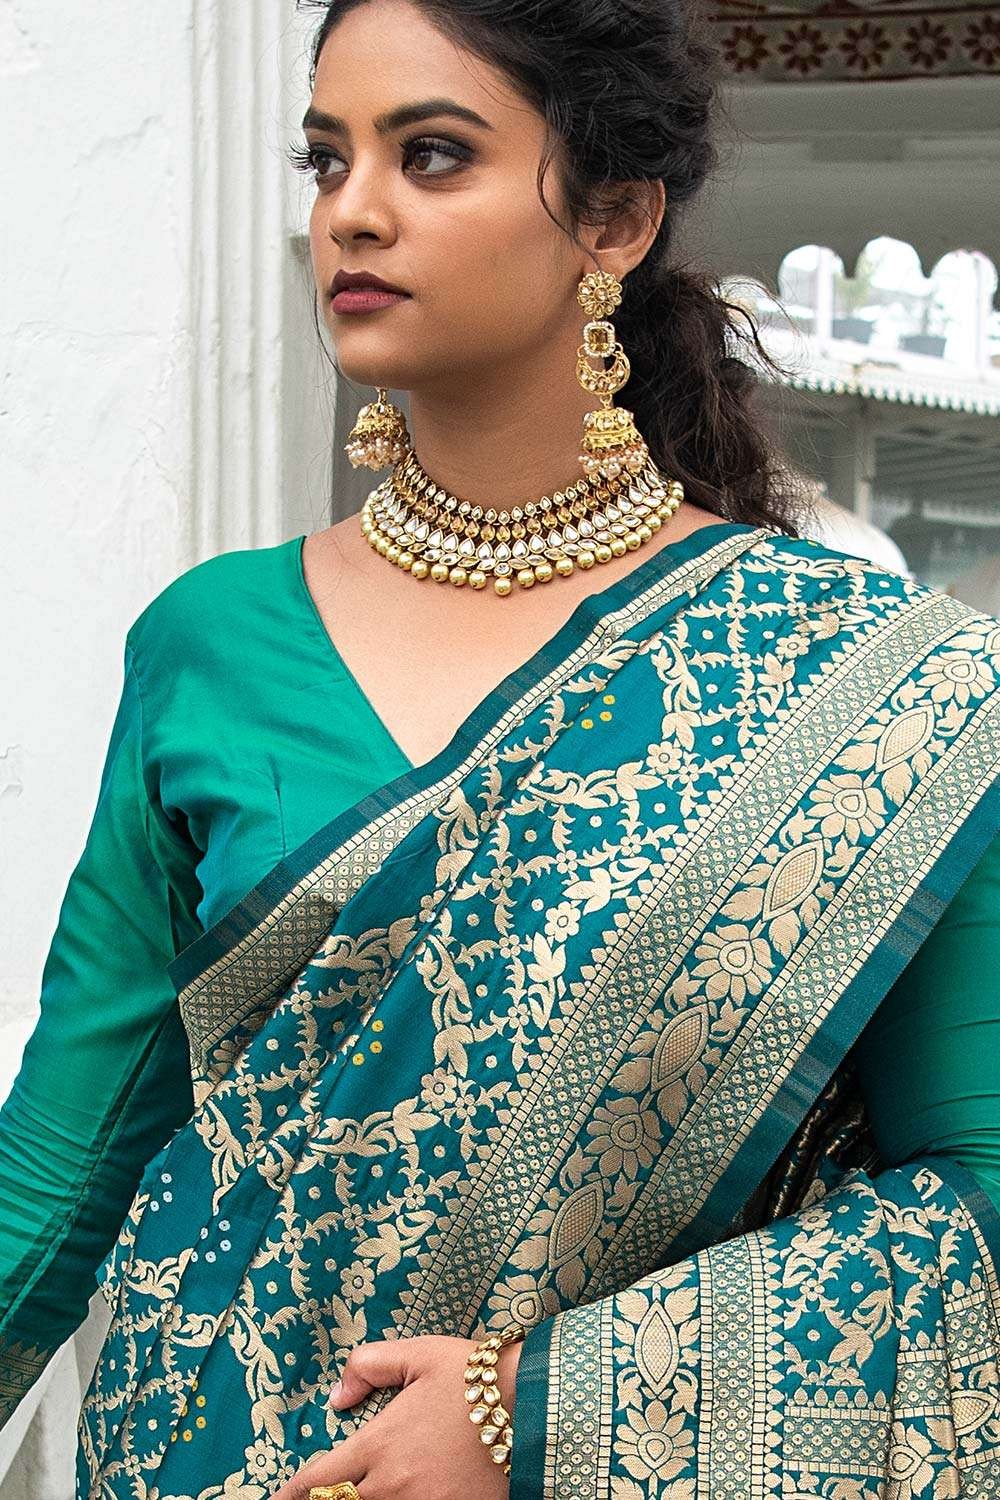 8 Useful Tips to purchase a Matching Jewellery for your Wedding Sarees